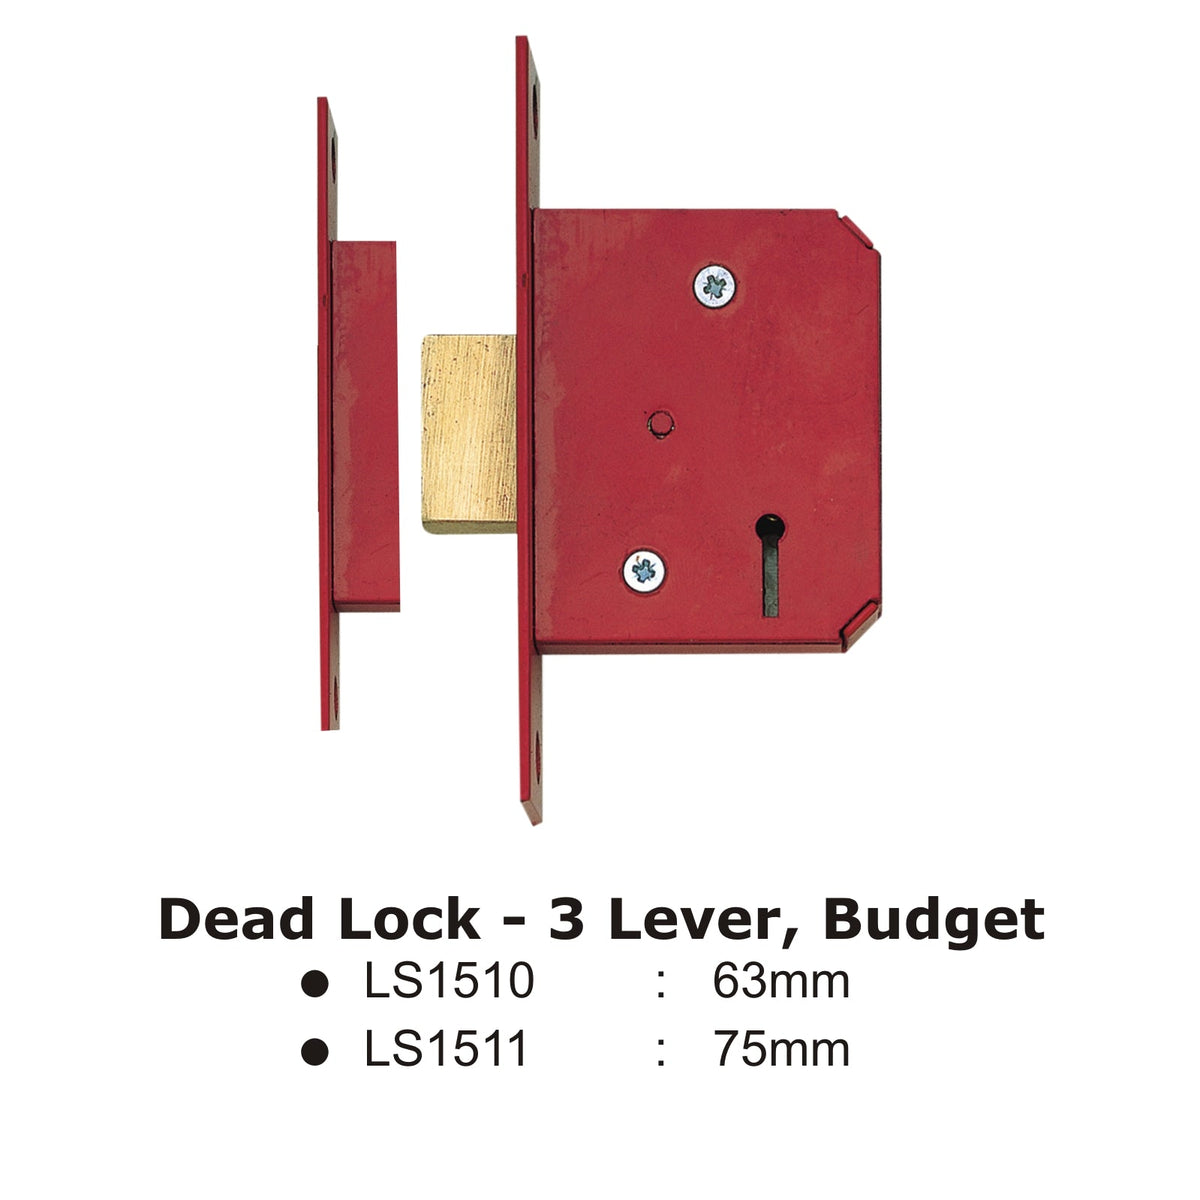 Dead Lock - 3 lever, Budget 75mm